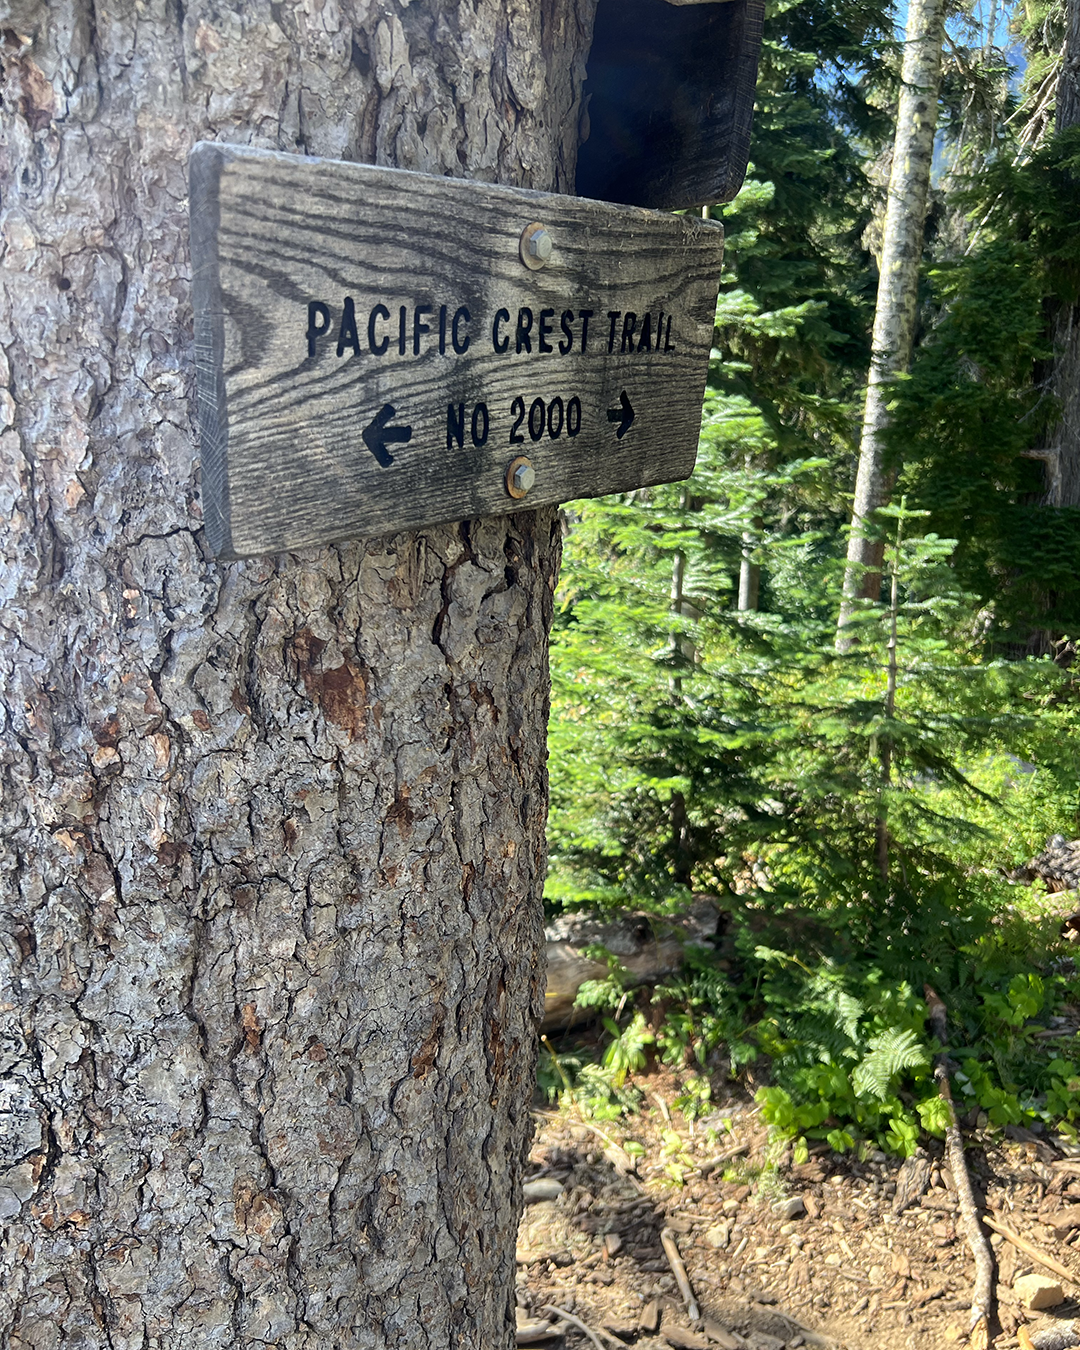  Setting foot on the Pacific Crest Trail for my first time, but definitely not my last.  